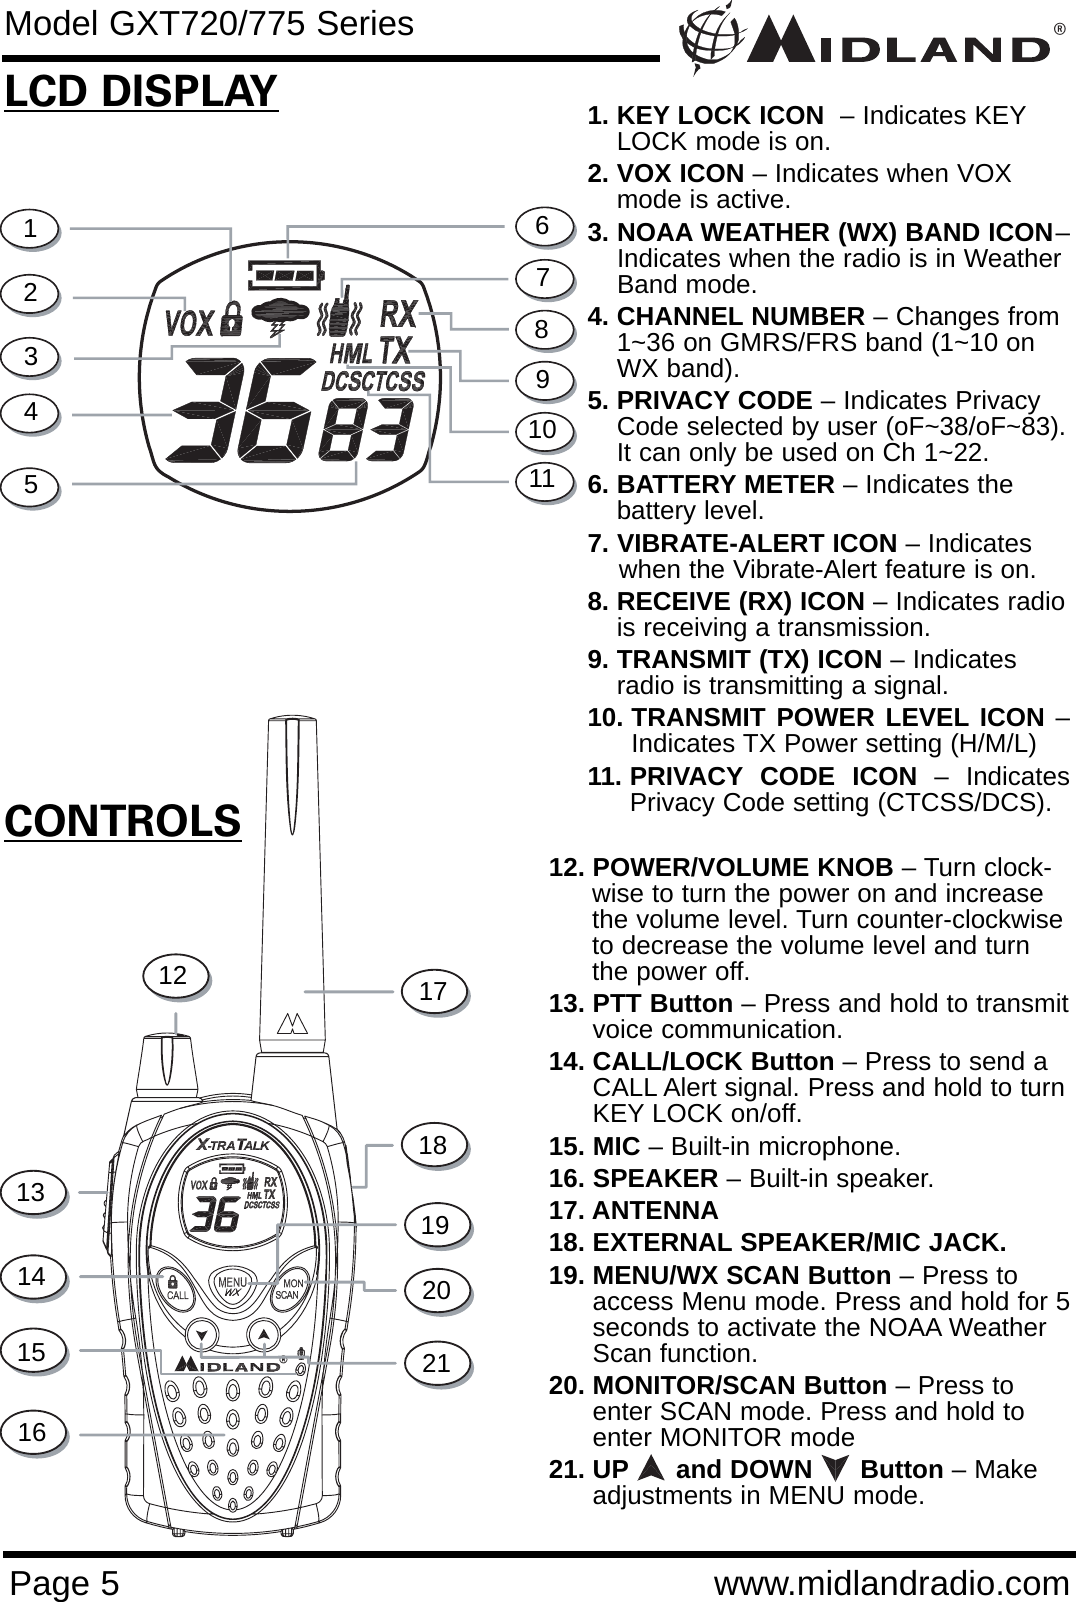 ®Page 5 www.midlandradio.comCONTROLSLCD DISPLAY1. KEY LOCK ICON  – Indicates KEYLOCK mode is on.2. VOX ICON – Indicates when VOXmode is active.3. NOAA WEATHER (WX) BAND ICON–Indicates when the radio is in Weather Band mode.4. CHANNEL NUMBER – Changes from1~36 on GMRS/FRS band (1~10 onWX band).5. PRIVACY CODE – Indicates PrivacyCode selected by user (oF~38/oF~83).It can only be used on Ch 1~22.6. BATTERY METER – Indicates thebattery level.7. VIBRATE-ALERT ICON – Indicates when the Vibrate-Alert feature is on.  8. RECEIVE (RX) ICON – Indicates radiois receiving a transmission. 9. TRANSMIT (TX) ICON – Indicatesradio is transmitting a signal.10. TRANSMIT POWER LEVEL ICON –Indicates TX Power setting (H/M/L)11. PRIVACY CODE ICON – IndicatesPrivacy Code setting (CTCSS/DCS).12. POWER/VOLUME KNOB – Turn clock-wise to turn the power on and increasethe volume level. Turn counter-clockwiseto decrease the volume level and turnthe power off.13. PTT Button – Press and hold to transmitvoice communication. 14. CALL/LOCK Button – Press to send aCALL Alert signal. Press and hold to turnKEY LOCK on/off.15. MIC – Built-in microphone.16. SPEAKER – Built-in speaker.17. ANTENNA18. EXTERNAL SPEAKER/MIC JACK.19. MENU/WX SCAN Button – Press toaccess Menu mode. Press and hold for 5seconds to activate the NOAA WeatherScan function.20. MONITOR/SCAN Button – Press toenter SCAN mode. Press and hold toenter MONITOR mode21. UP and DOWN      Button – Makeadjustments in MENU mode.1234567891012131415162120191817Model GXT720/775 Series11